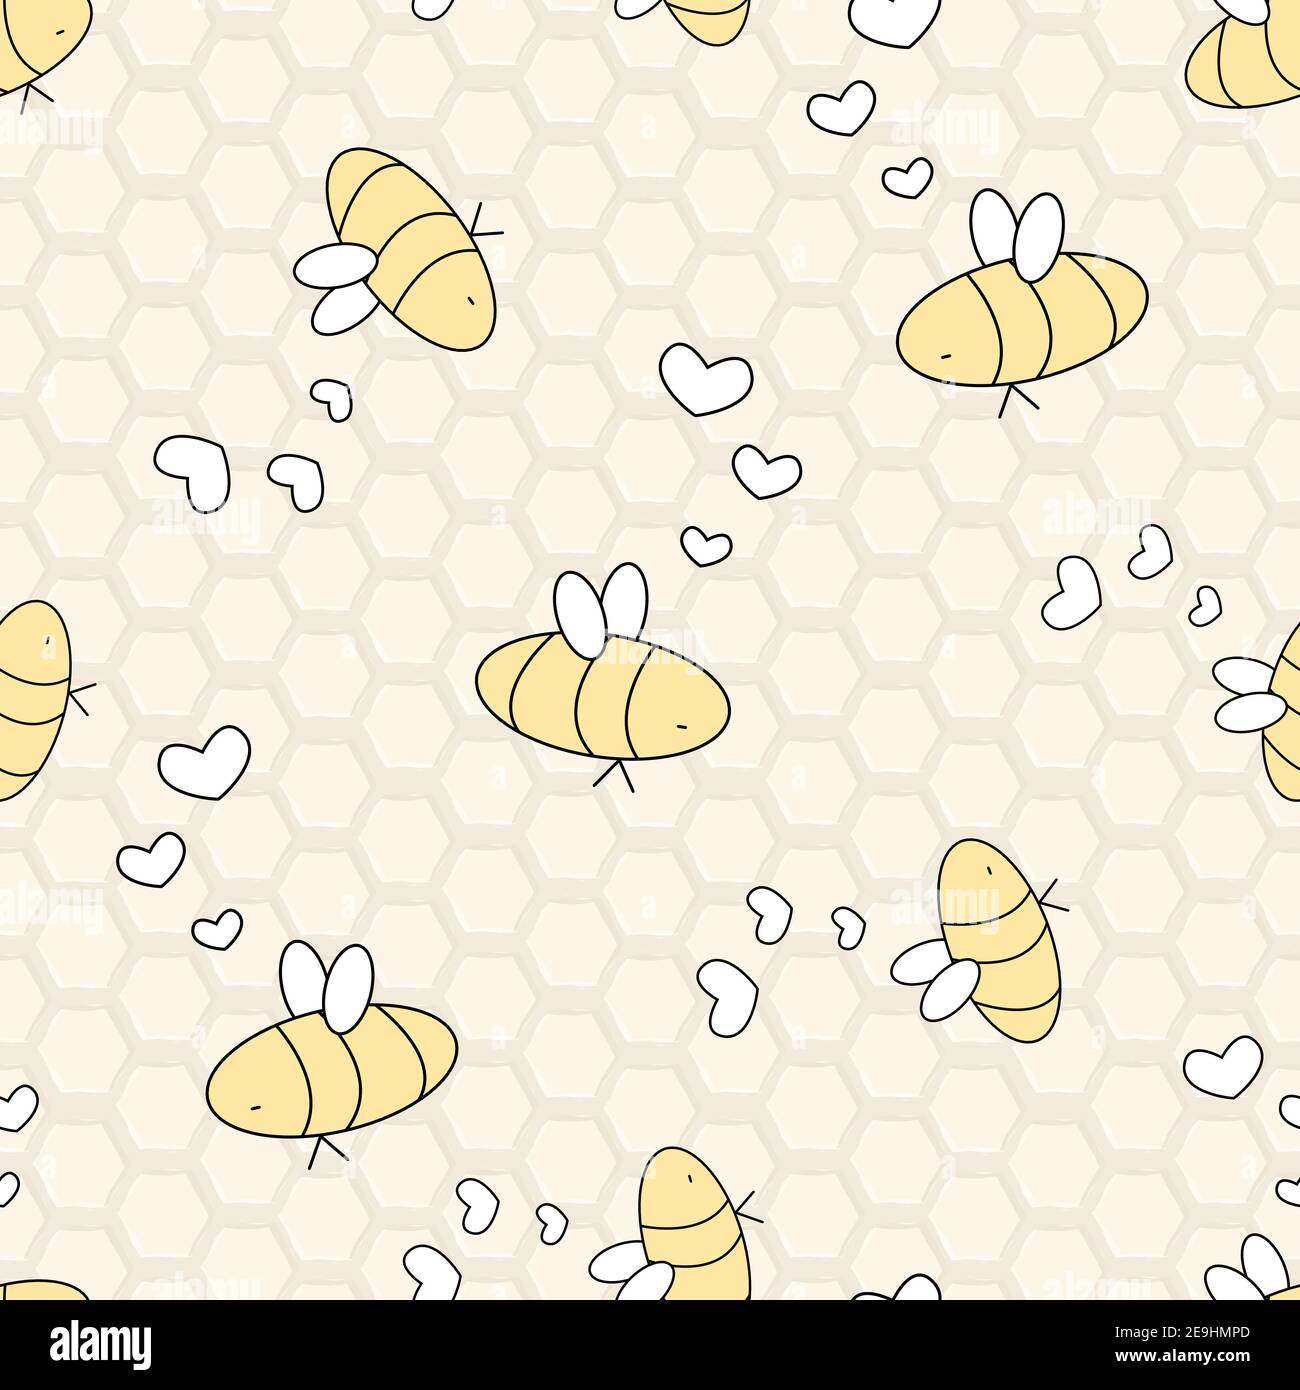 Buzzing bees in black and white printed on a yellow honeycomb